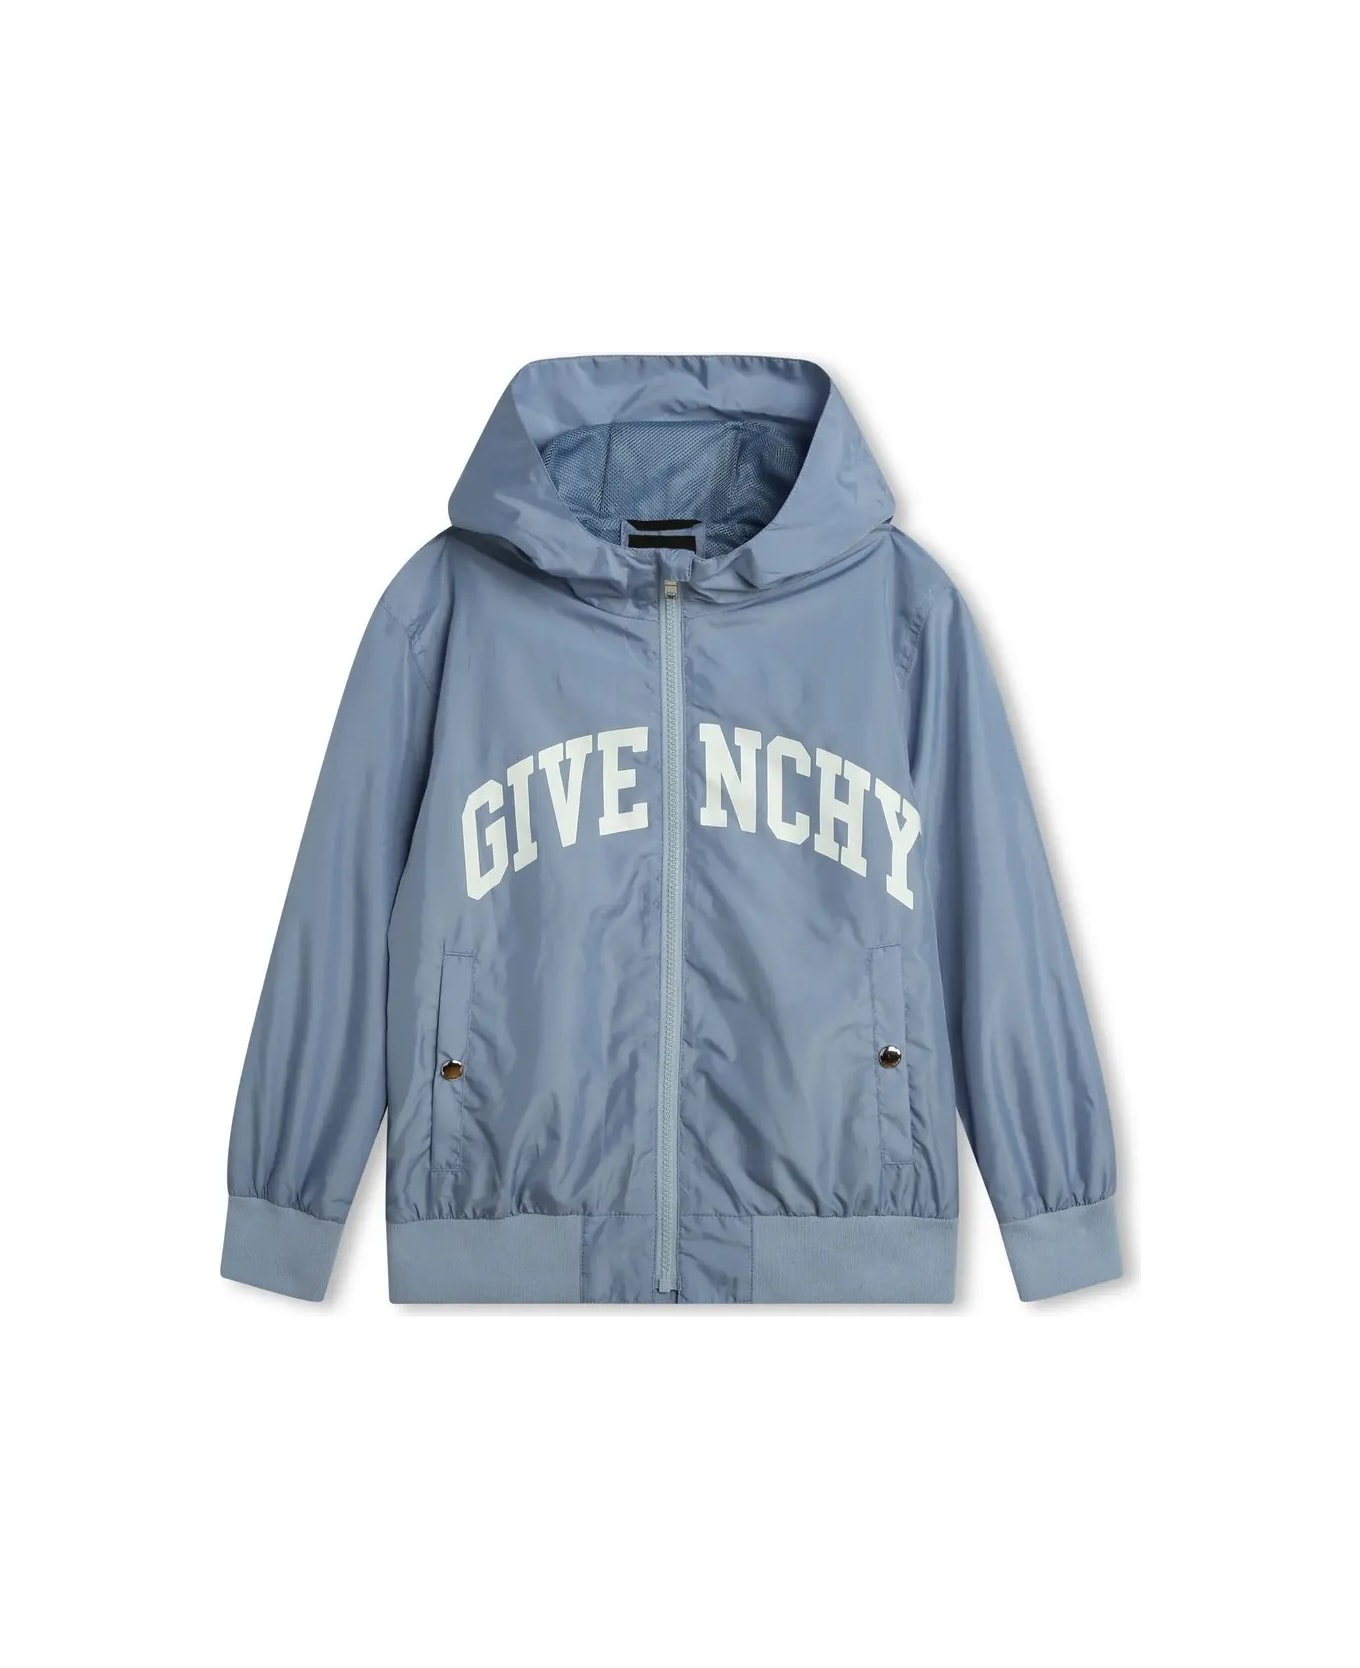 Givenchy Light Blue Givenchy Windbreaker With Zip And Hood - Azzurro